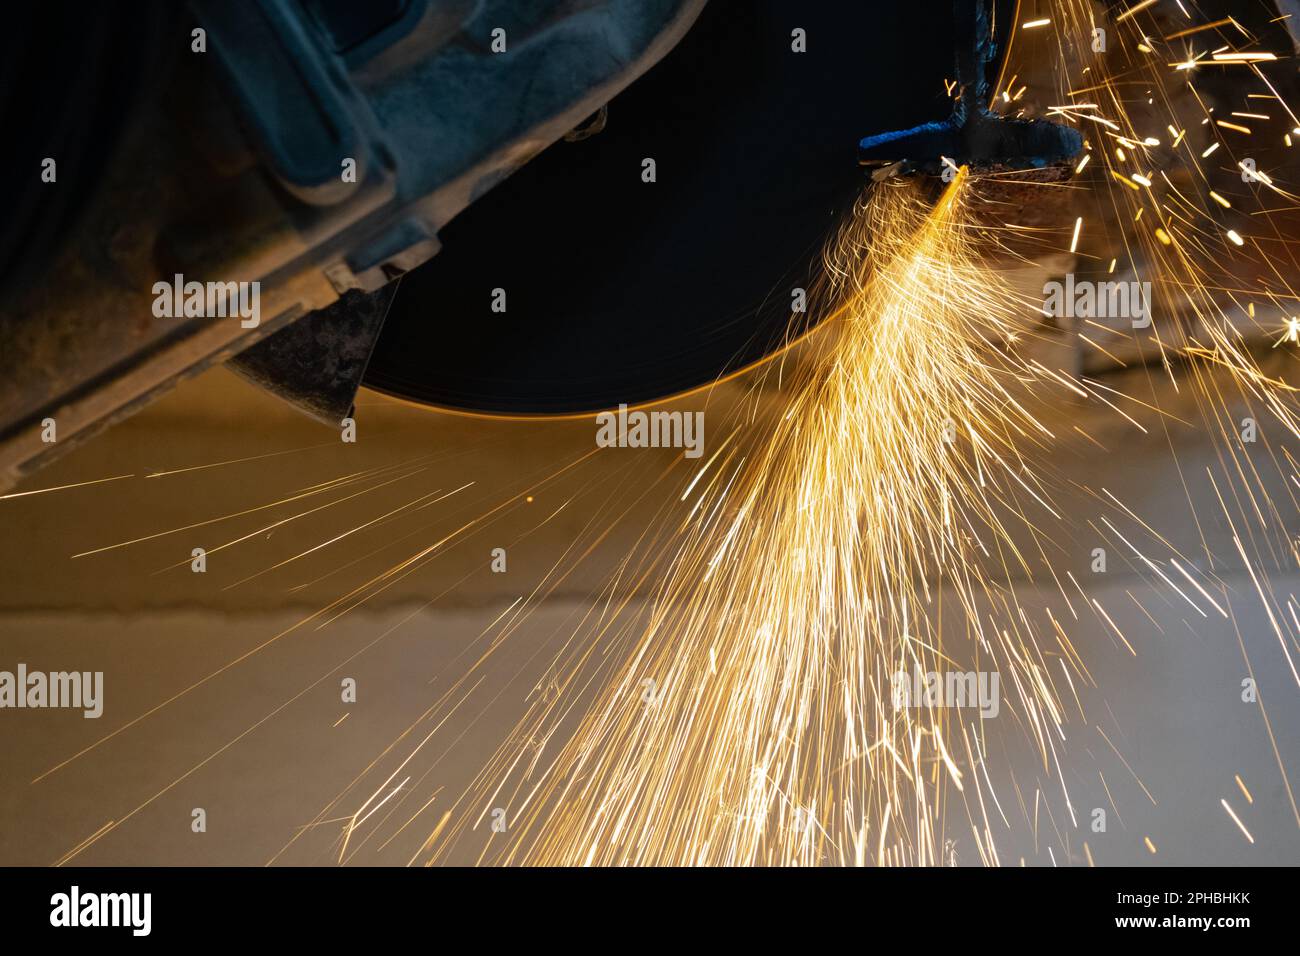 Sparks flying off the cutting disc of an angle grinder Stock Photo